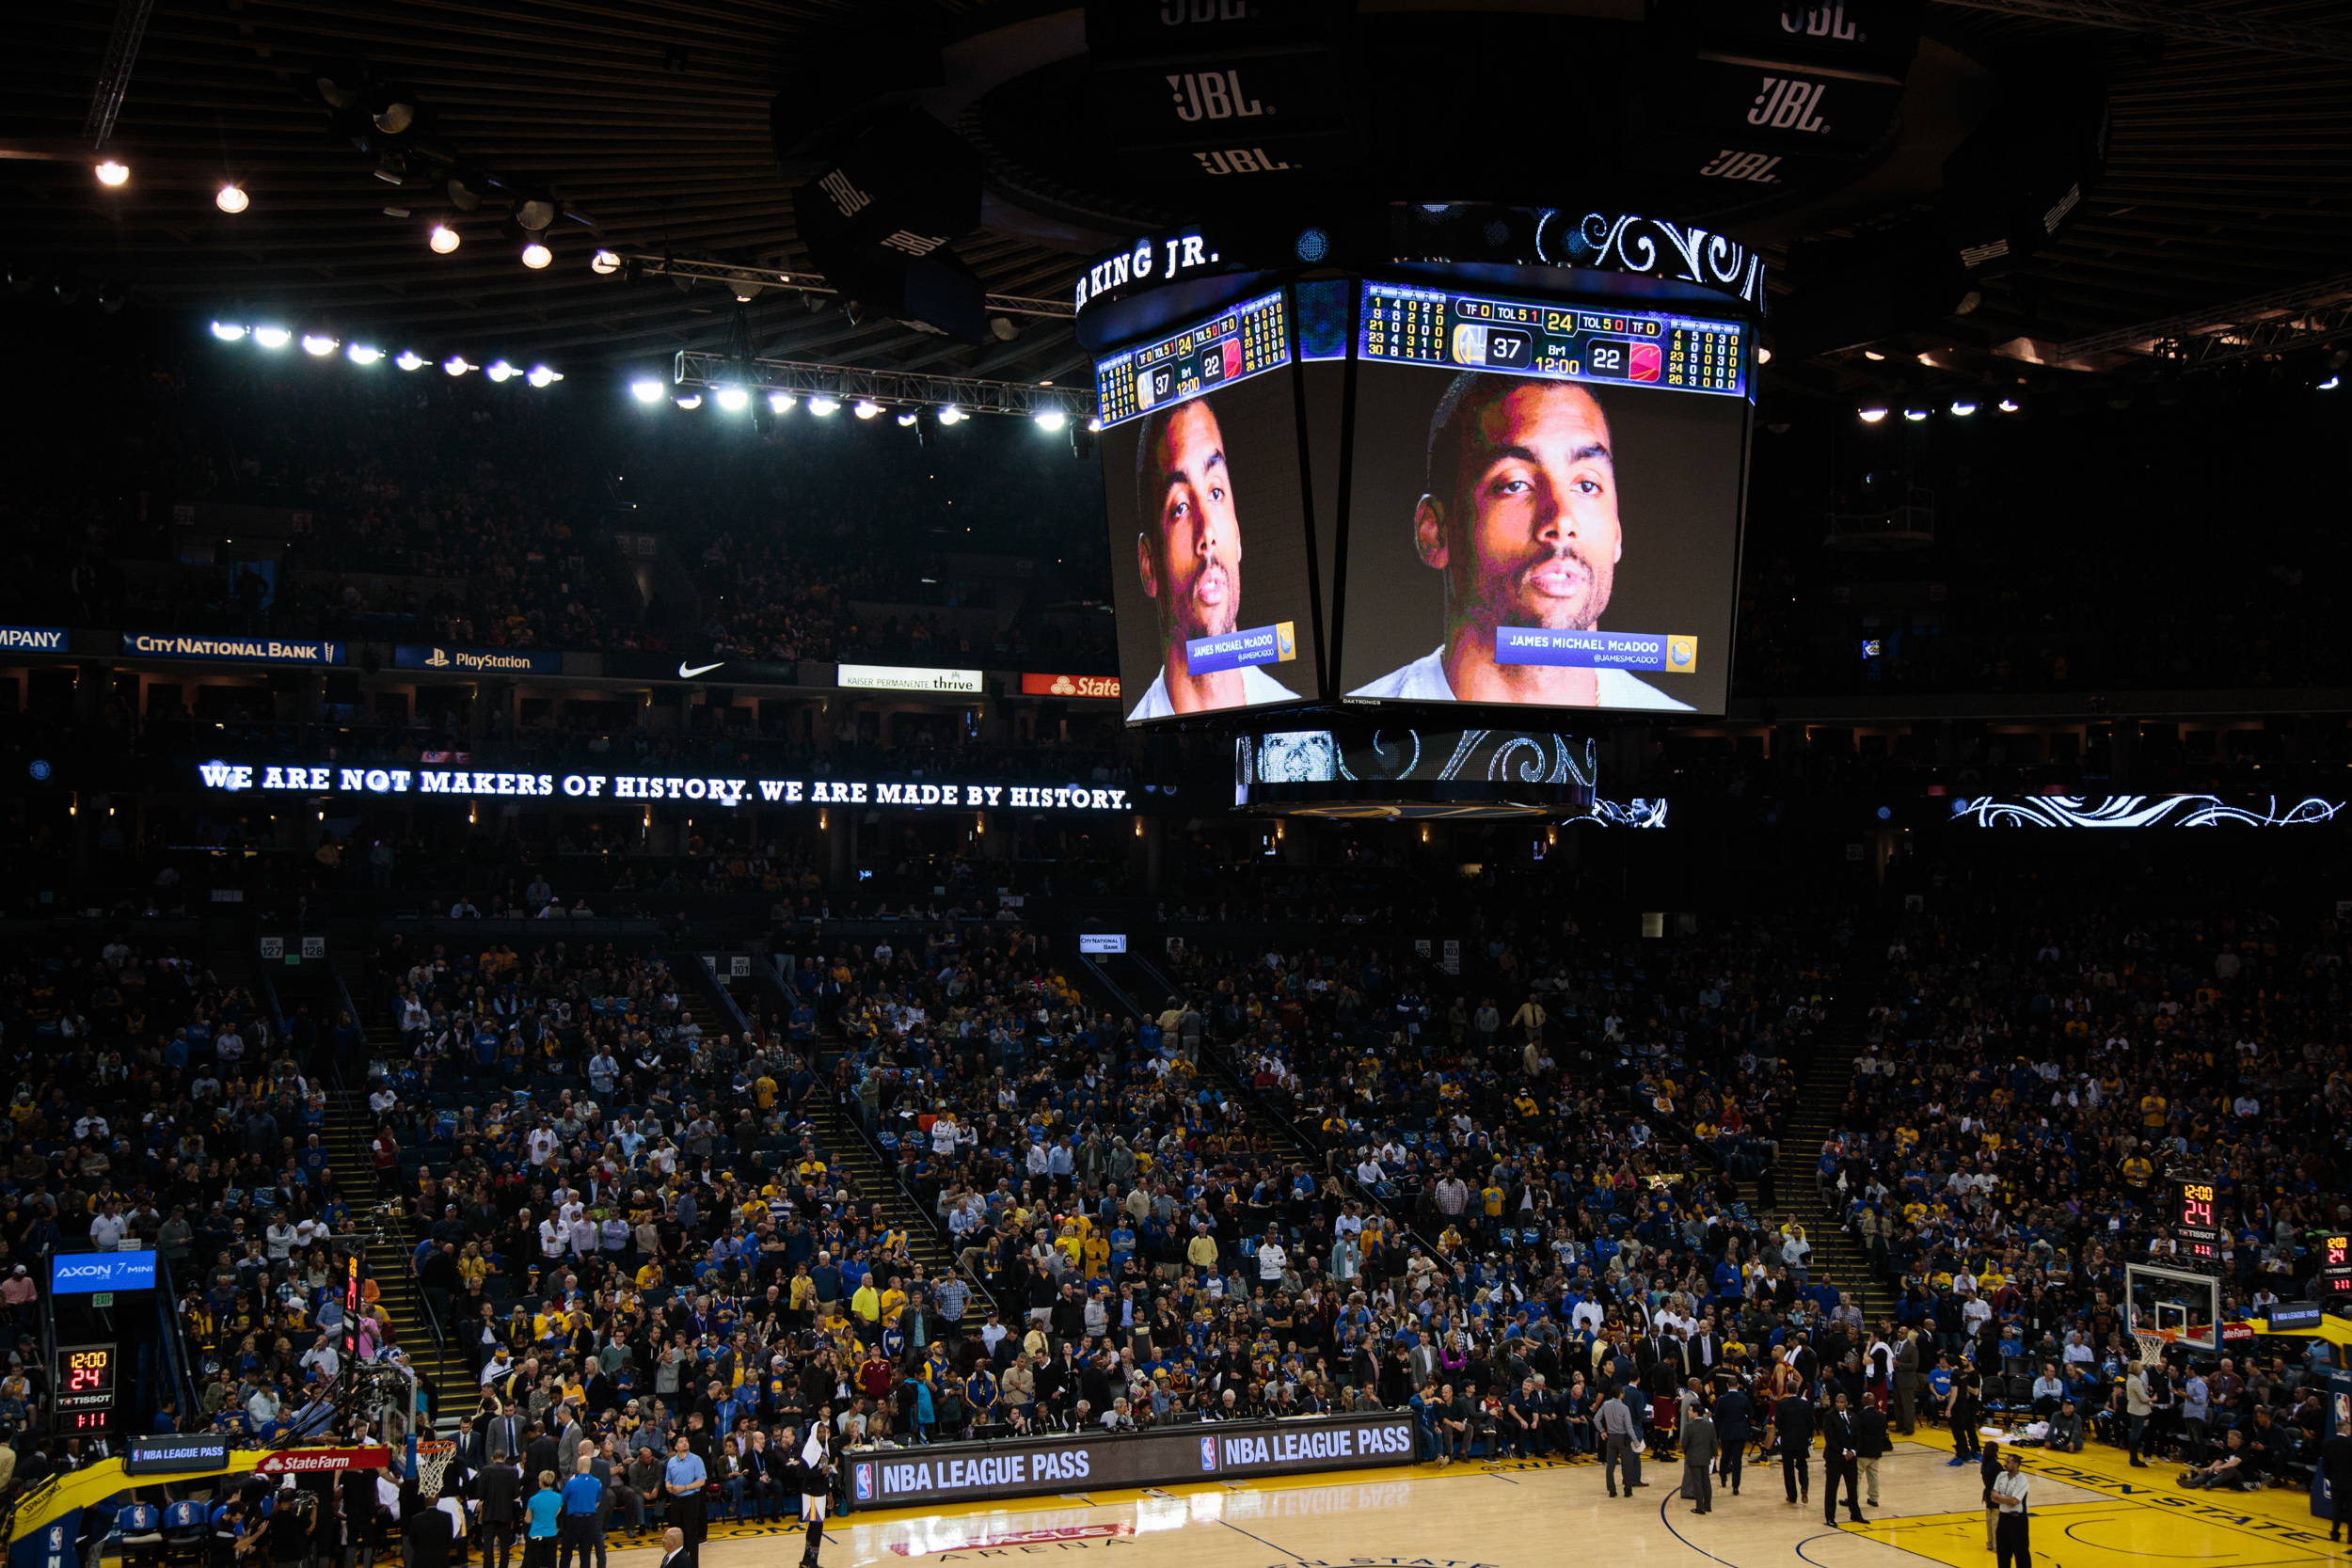  A video of McAdoo speaking about what MLK Jr. Day means to him is part of a video compiliation being shown on the Jumbotron during the game in honor of MLK Jr. Day. 